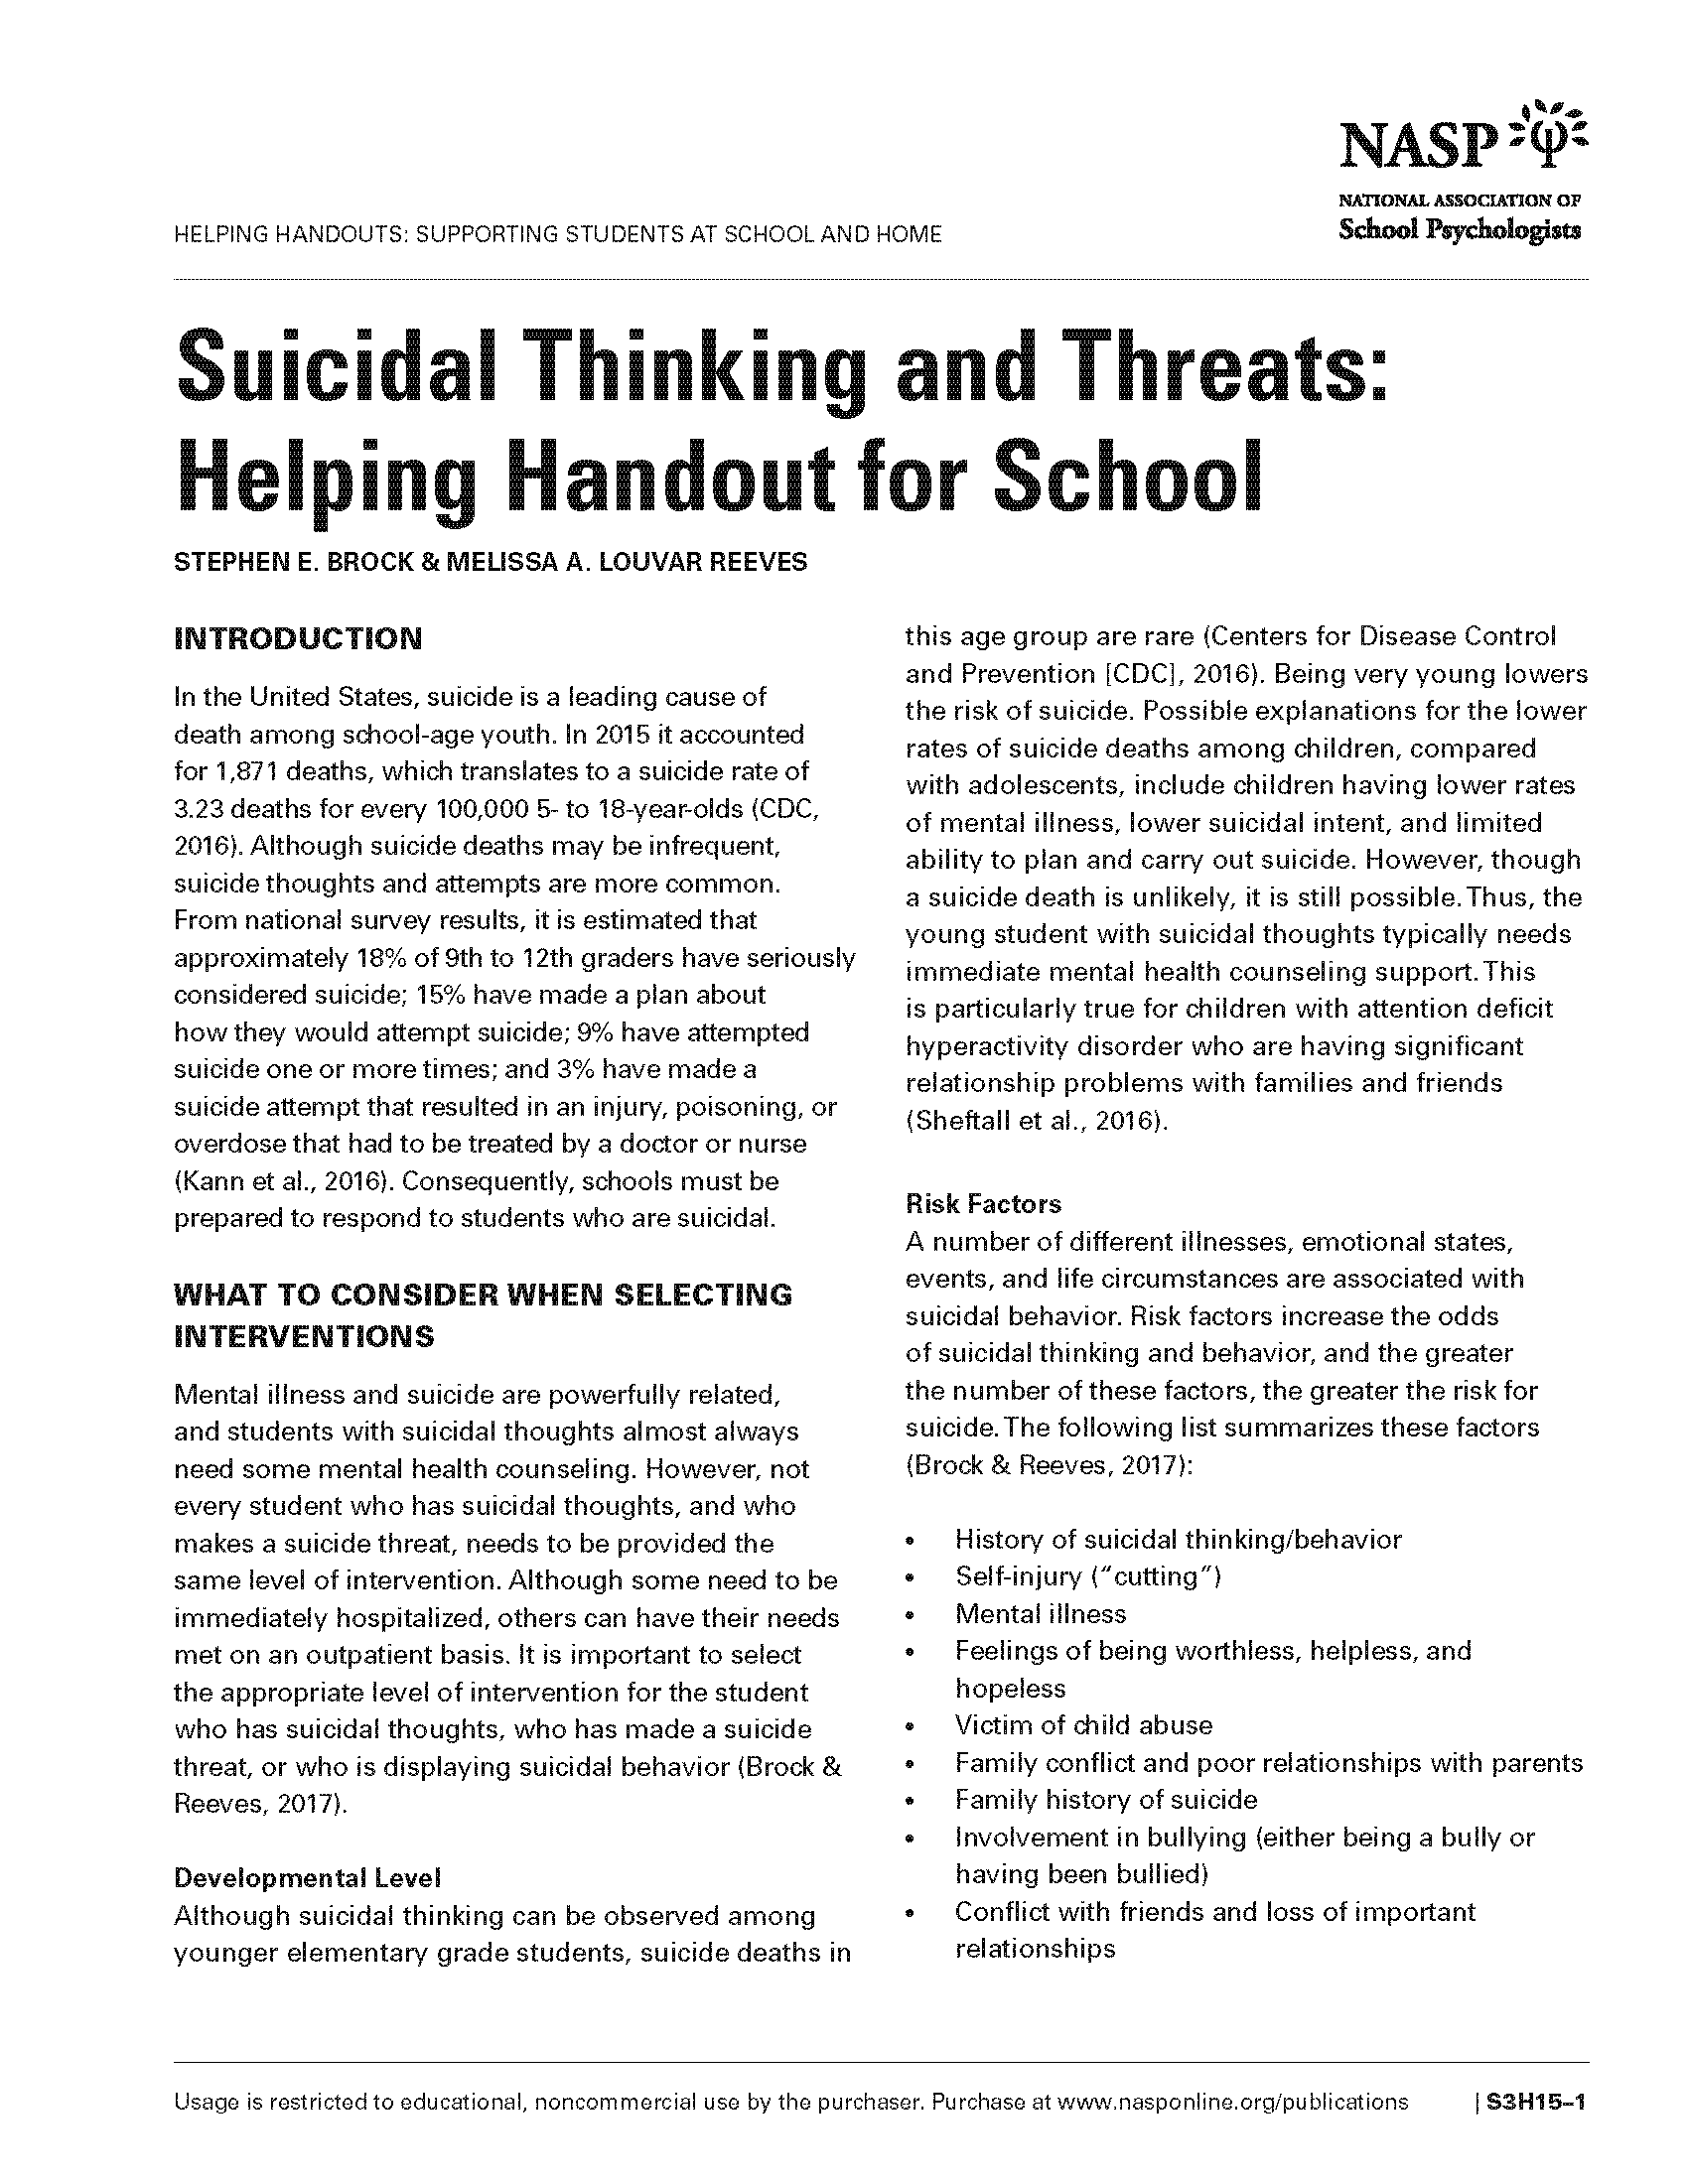 Suicidal Thinking and Threats: Helping Handout for School 